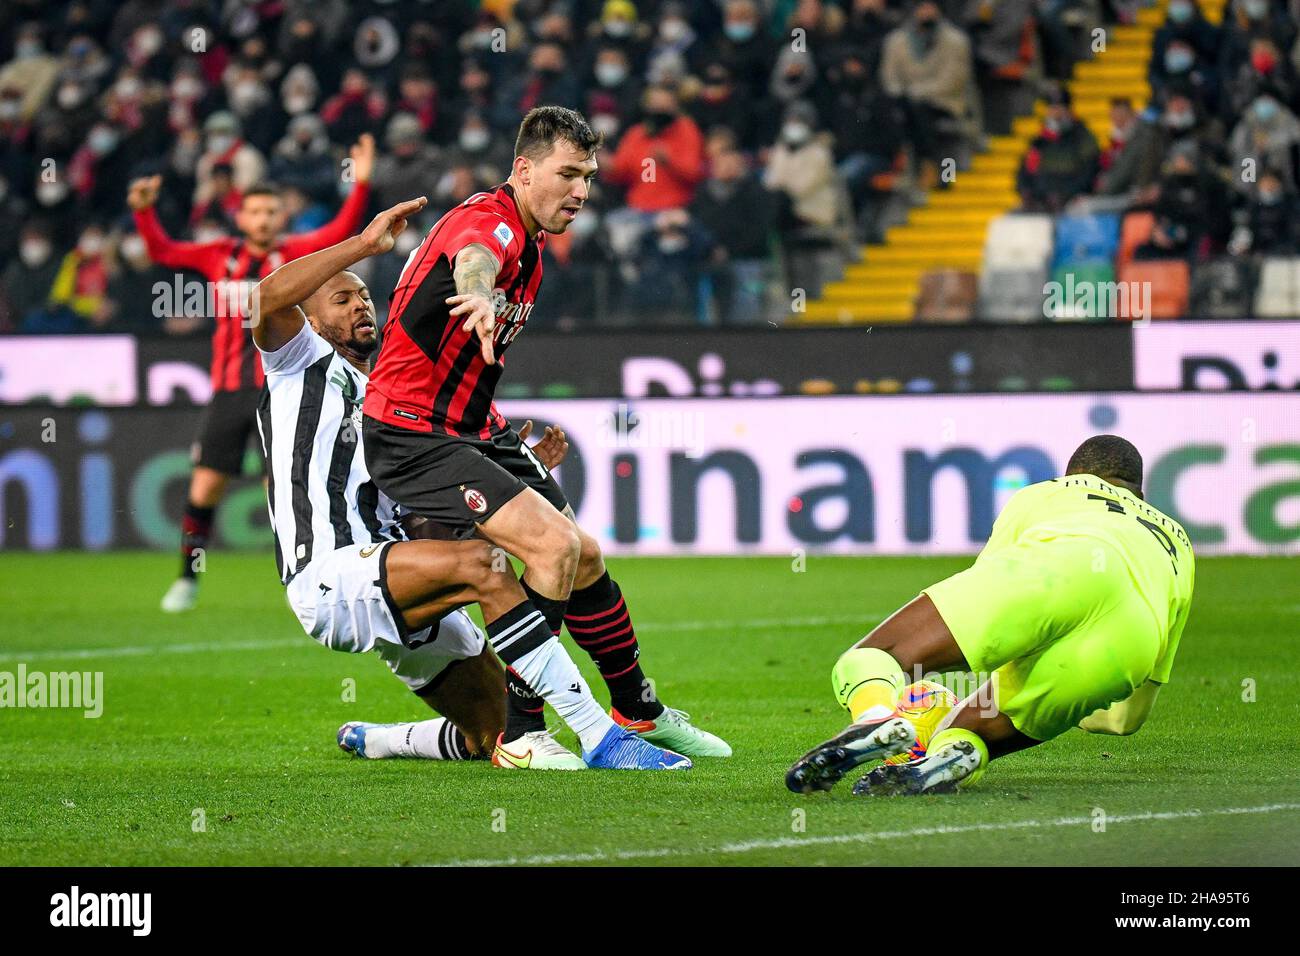 Udine, Italy. 11th Dec, 2021. Udinese's Norberto Bercique Gomes Betuncal tries to score a goal thwarted by Milan's Alessio Romagnoli (Milan) during Udinese Calcio vs AC Milan, italian soccer Serie A match in Udine, Italy, December 11 2021 Credit: Independent Photo Agency/Alamy Live News Stock Photo